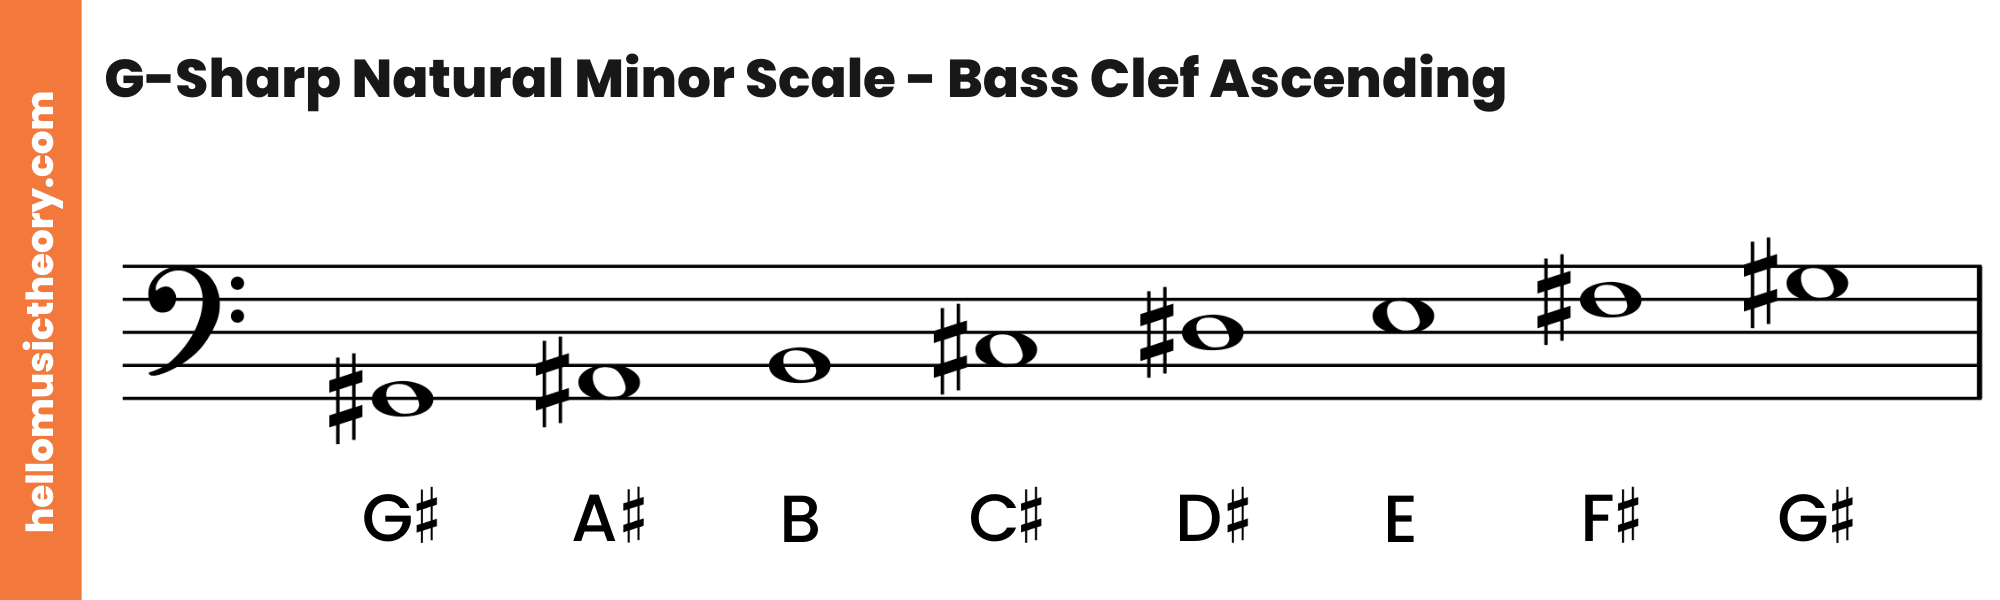 G-Sharp Natural Minor Scale Bass Clef Ascending